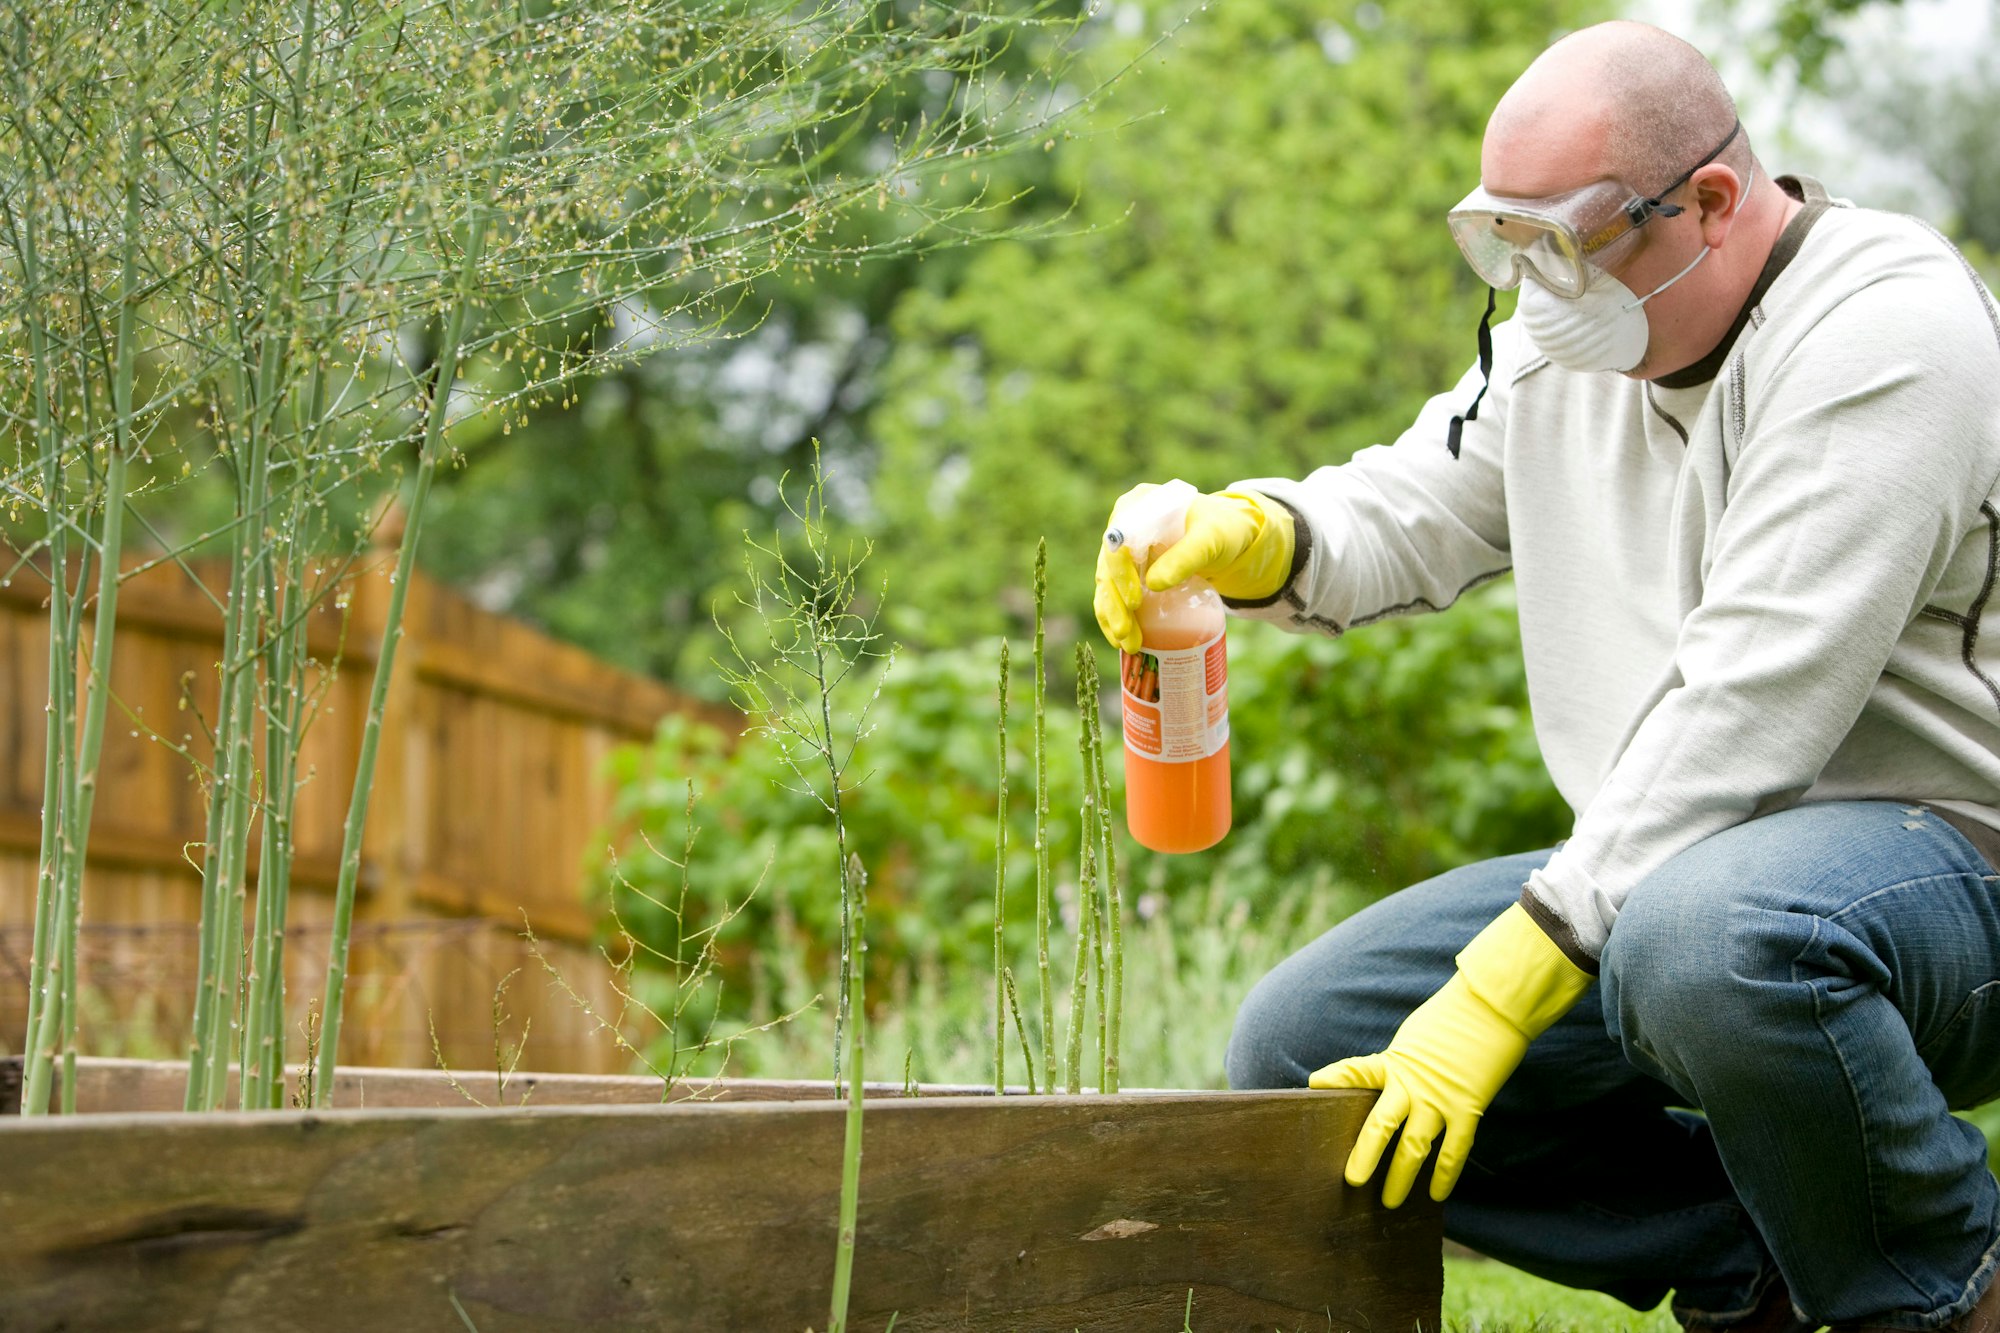 Gardening is a very beneficial activity, not only for the environment, but for those who partake in this exercise. After properly reading the instructions, this man was in the process of applying pesticide spray to his raised-bed home garden.